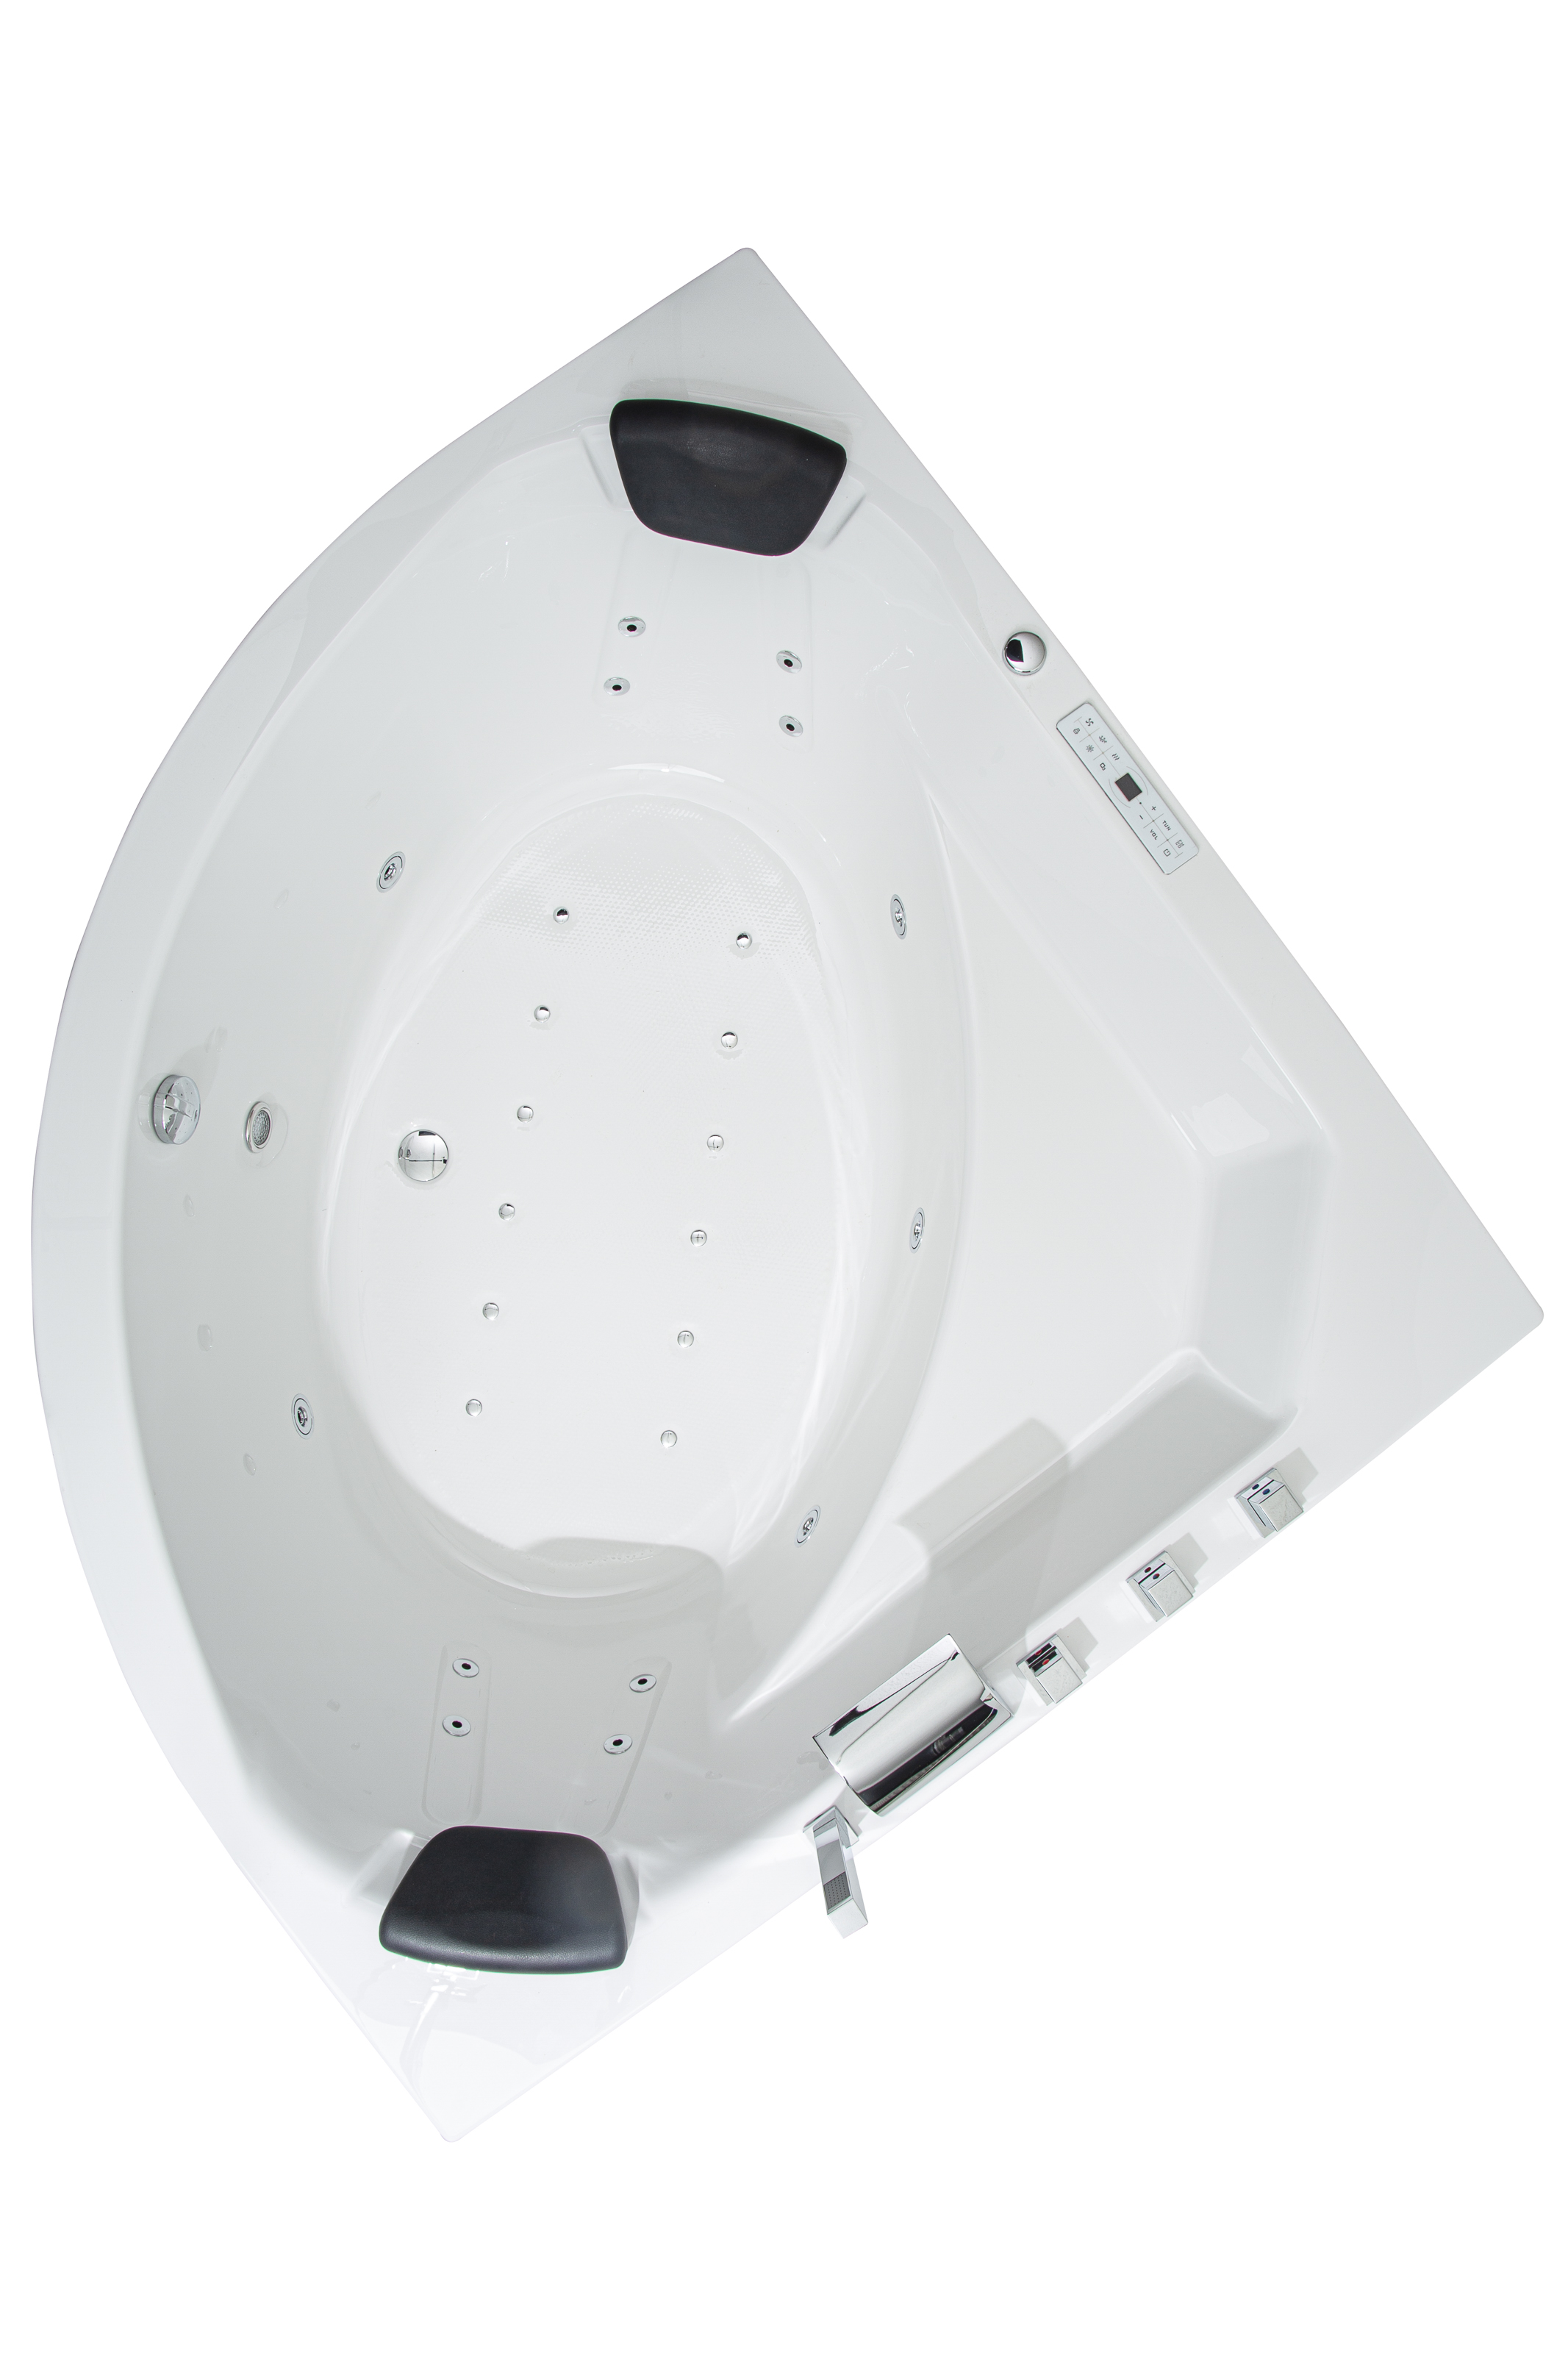 Baignoire d'angle Whirlpool avec 25 jets de massage Spa Bali Tulamben ONE 155x155 cm blanc MADE IN GERMANY